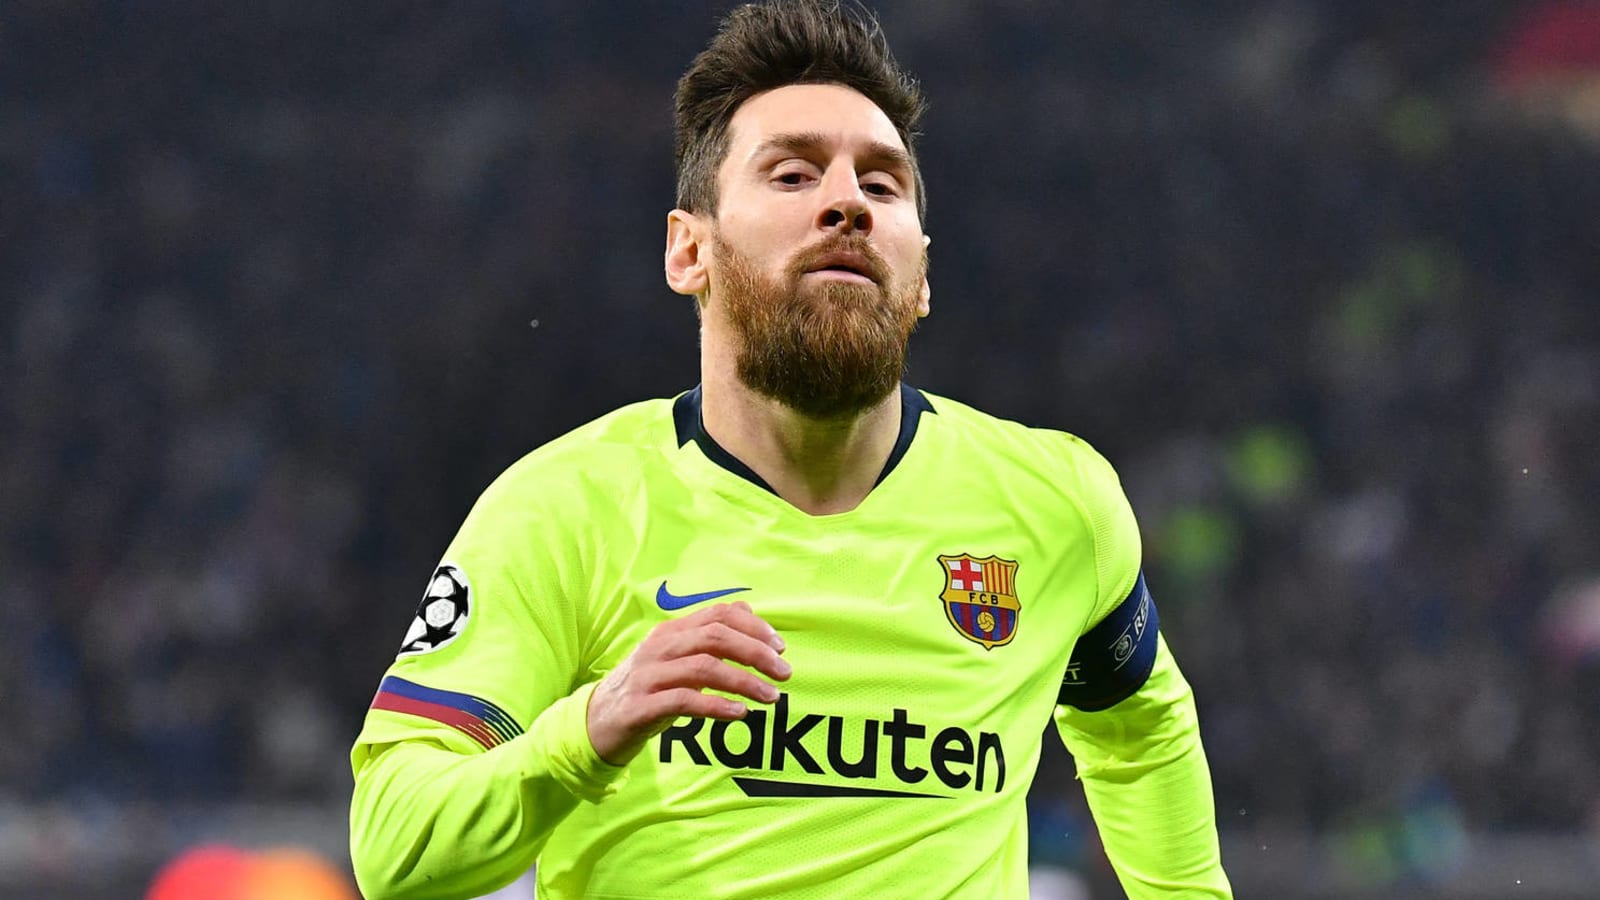 Report: Manchester United out of Lionel Messi sweepstakes